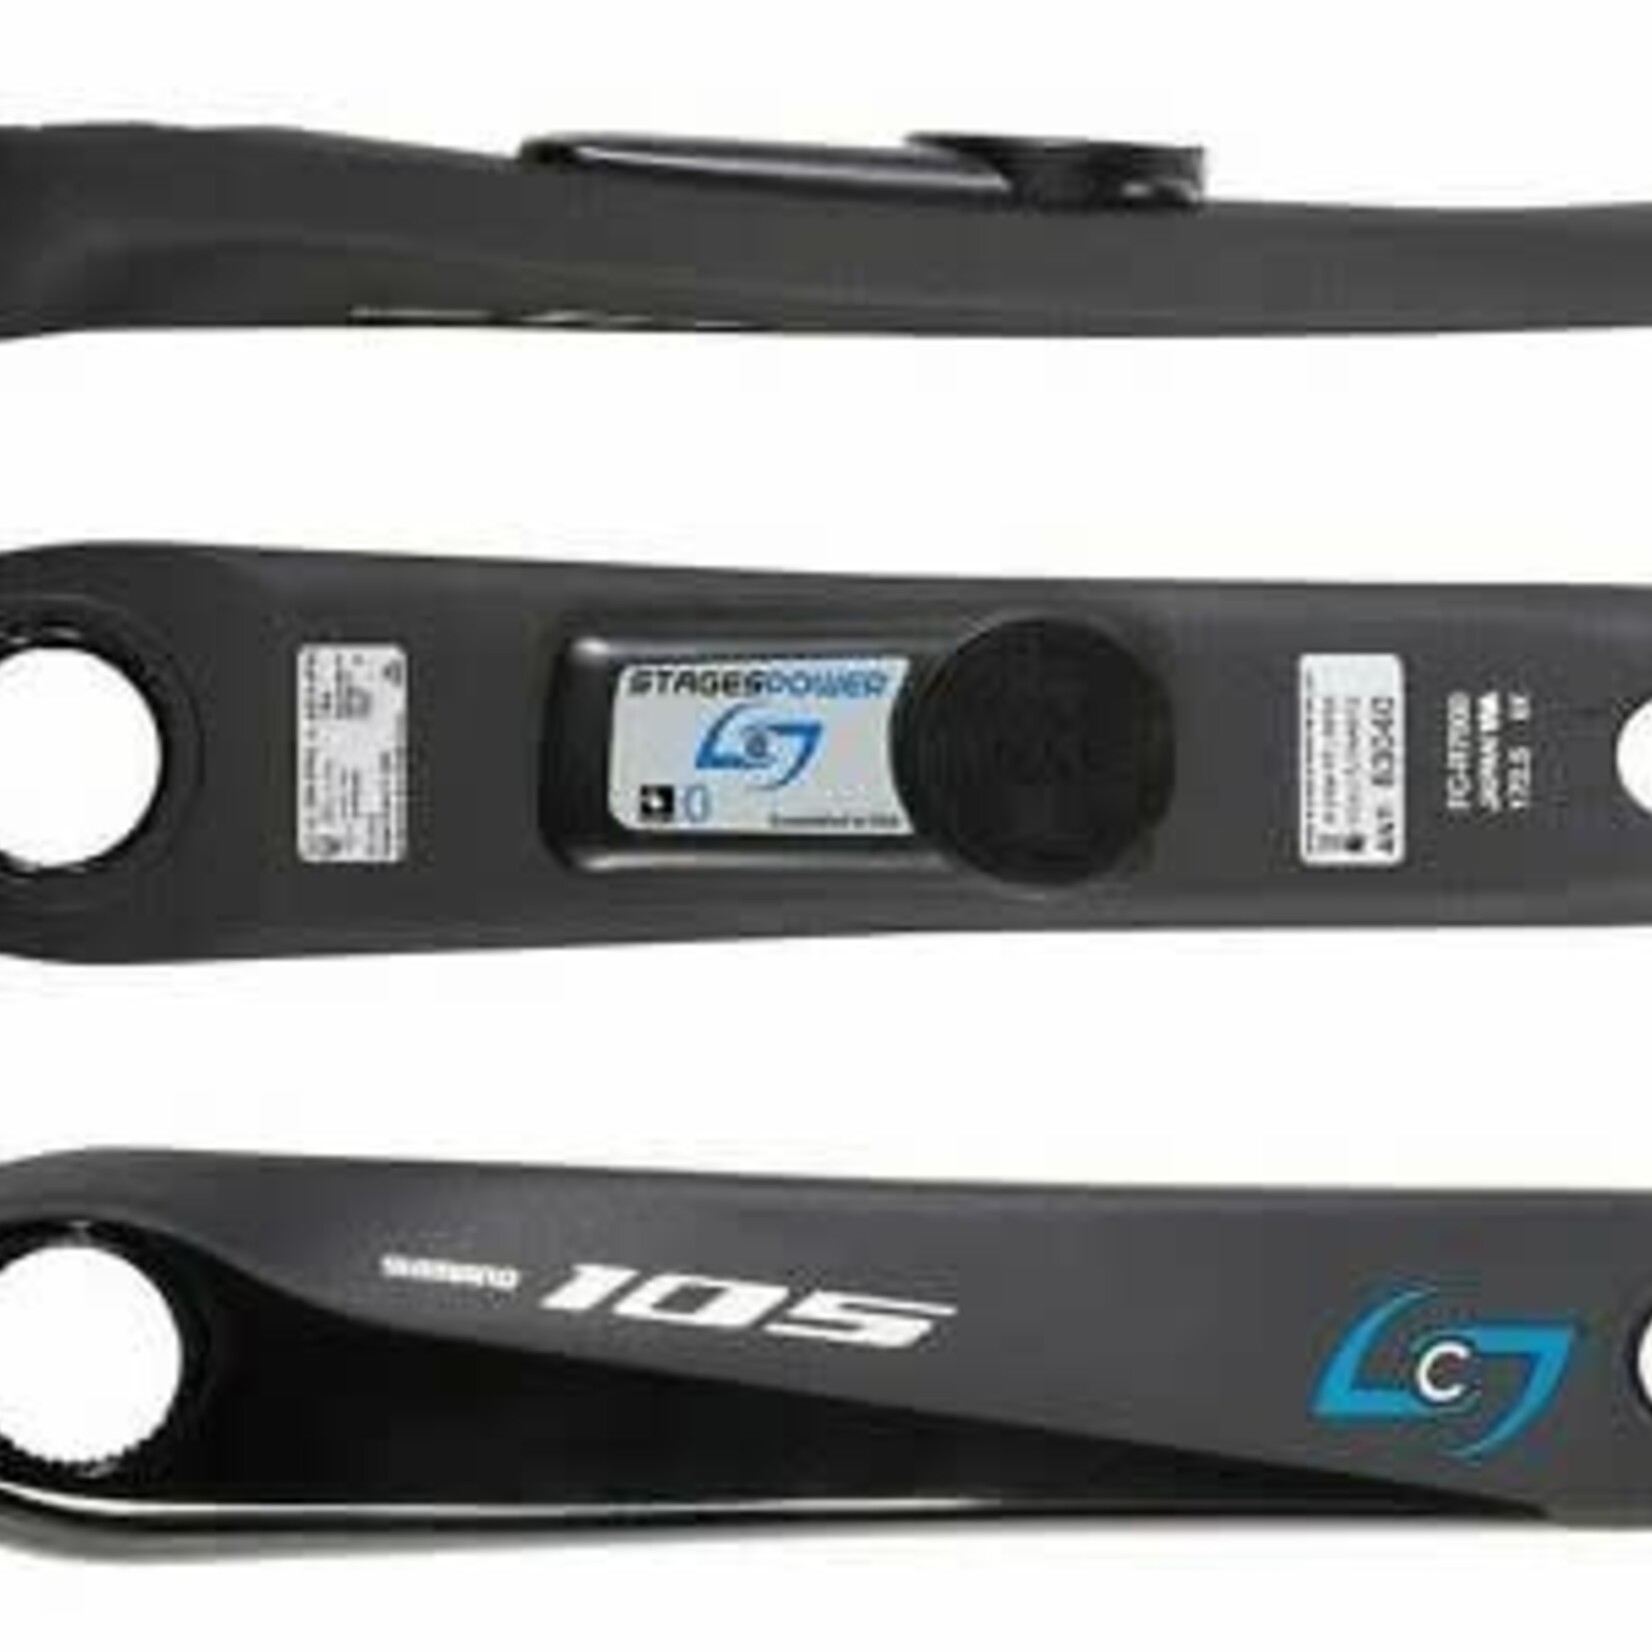 Stages Cycling STAGES POWER GAU 105 R7000 170MM NOIR